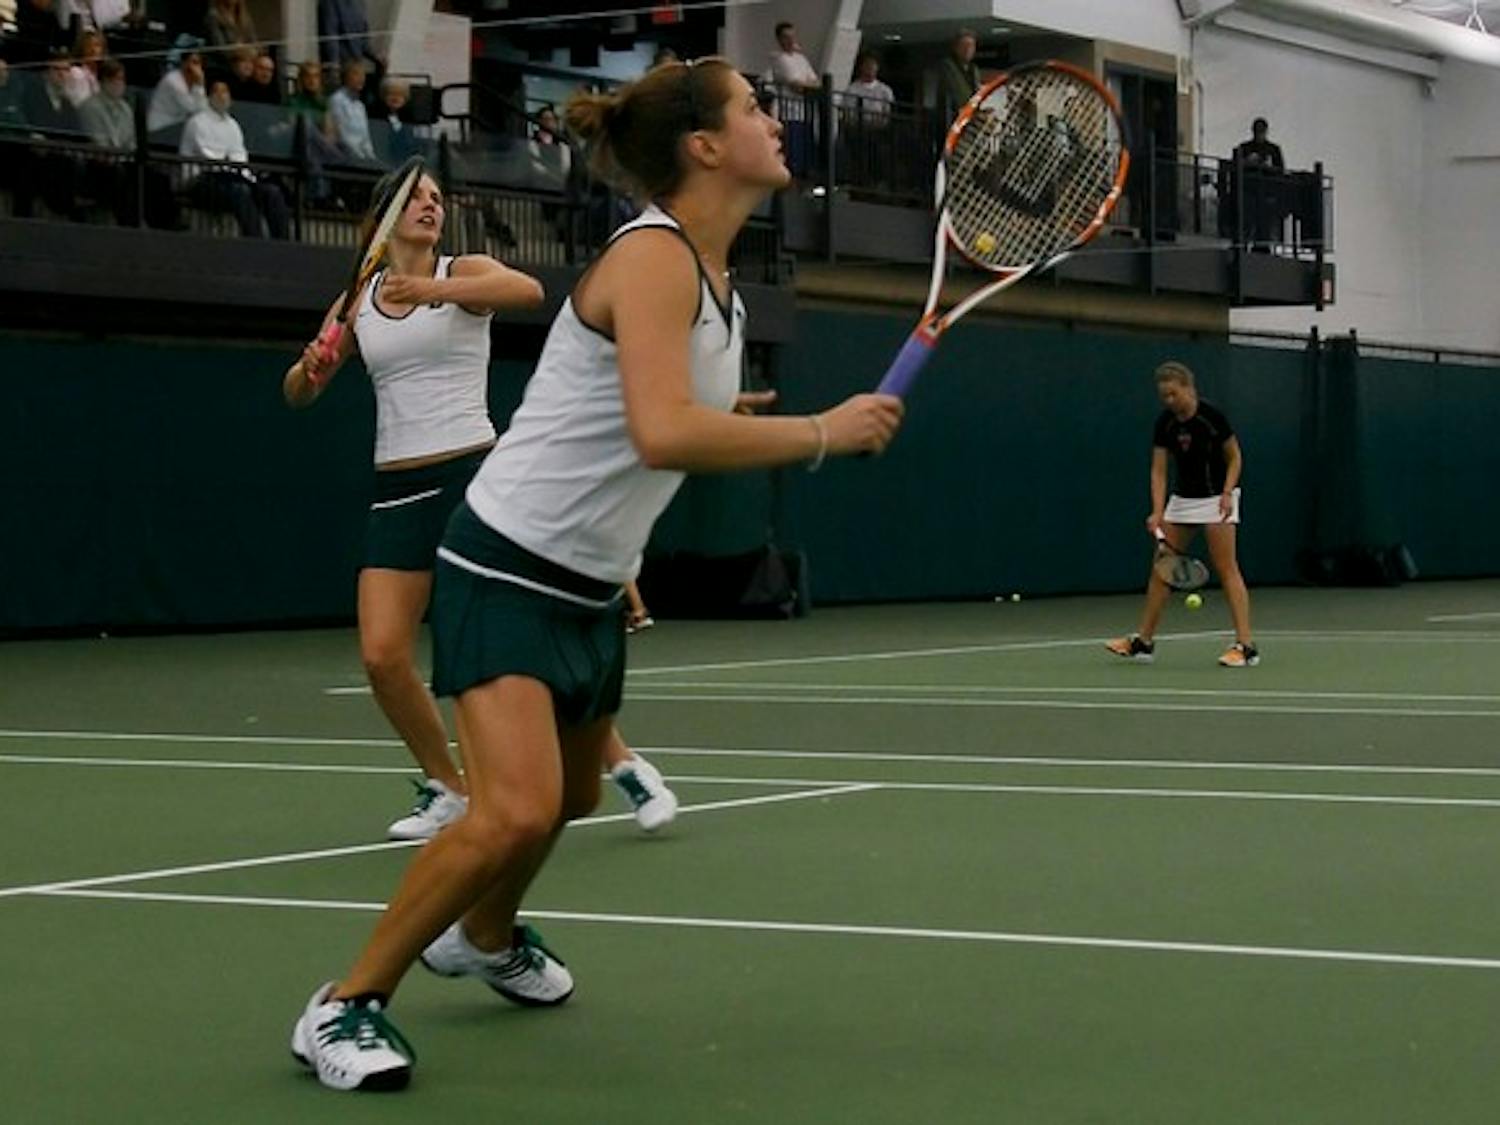 The Big Green women's tennis team will continue its Ivy League schedule, playing Yale and Brown this weekend before taking on Harvard next week.